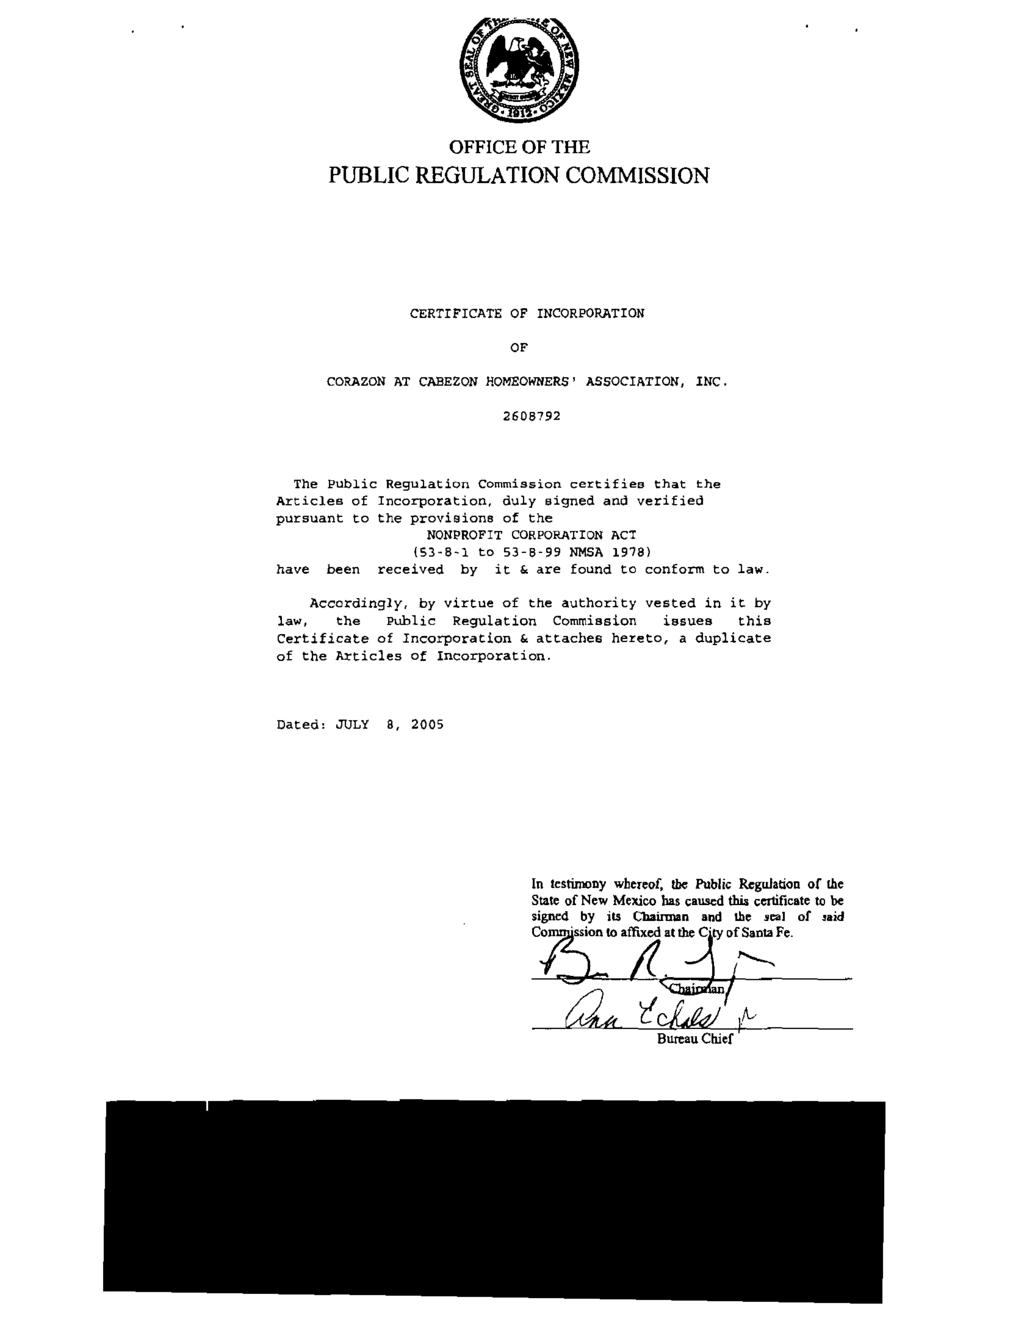 OFFICE OF THE PUBLIC REGULATION COMMISSION CERTIFICATE OF INCORPORATION OF CORAZON AT CABEZON HOMEOWNERS' ASSOCIATION, INC.